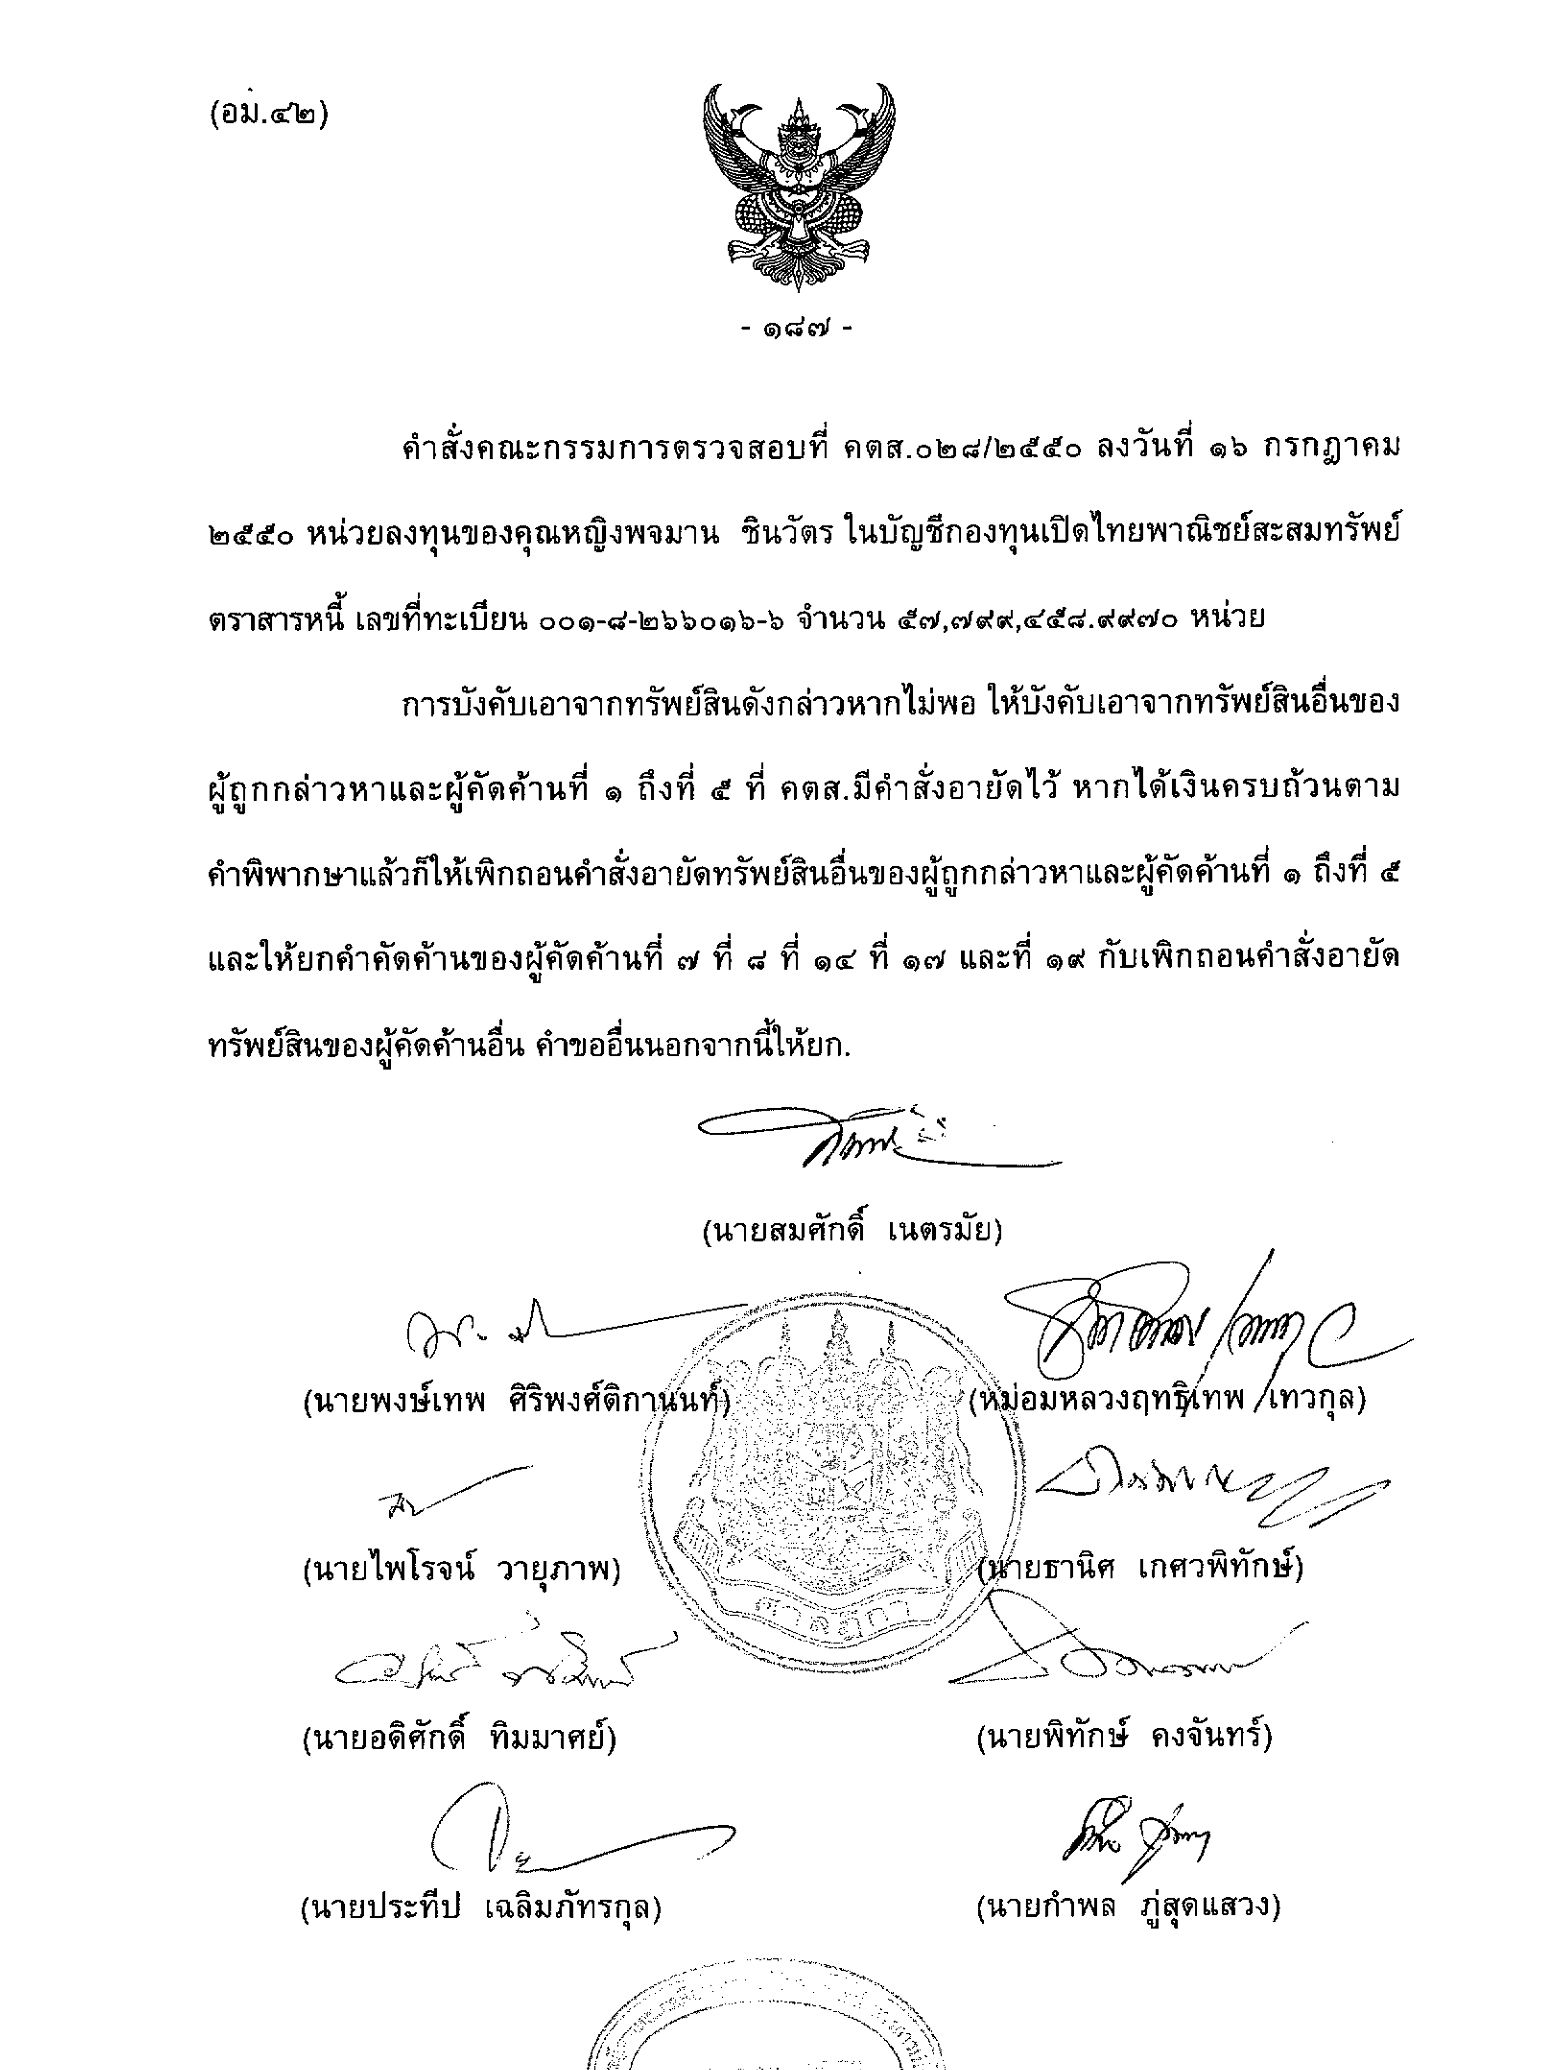 Judgment-of-the-Supreme-Court-of-Thailand-26022010-lastpage